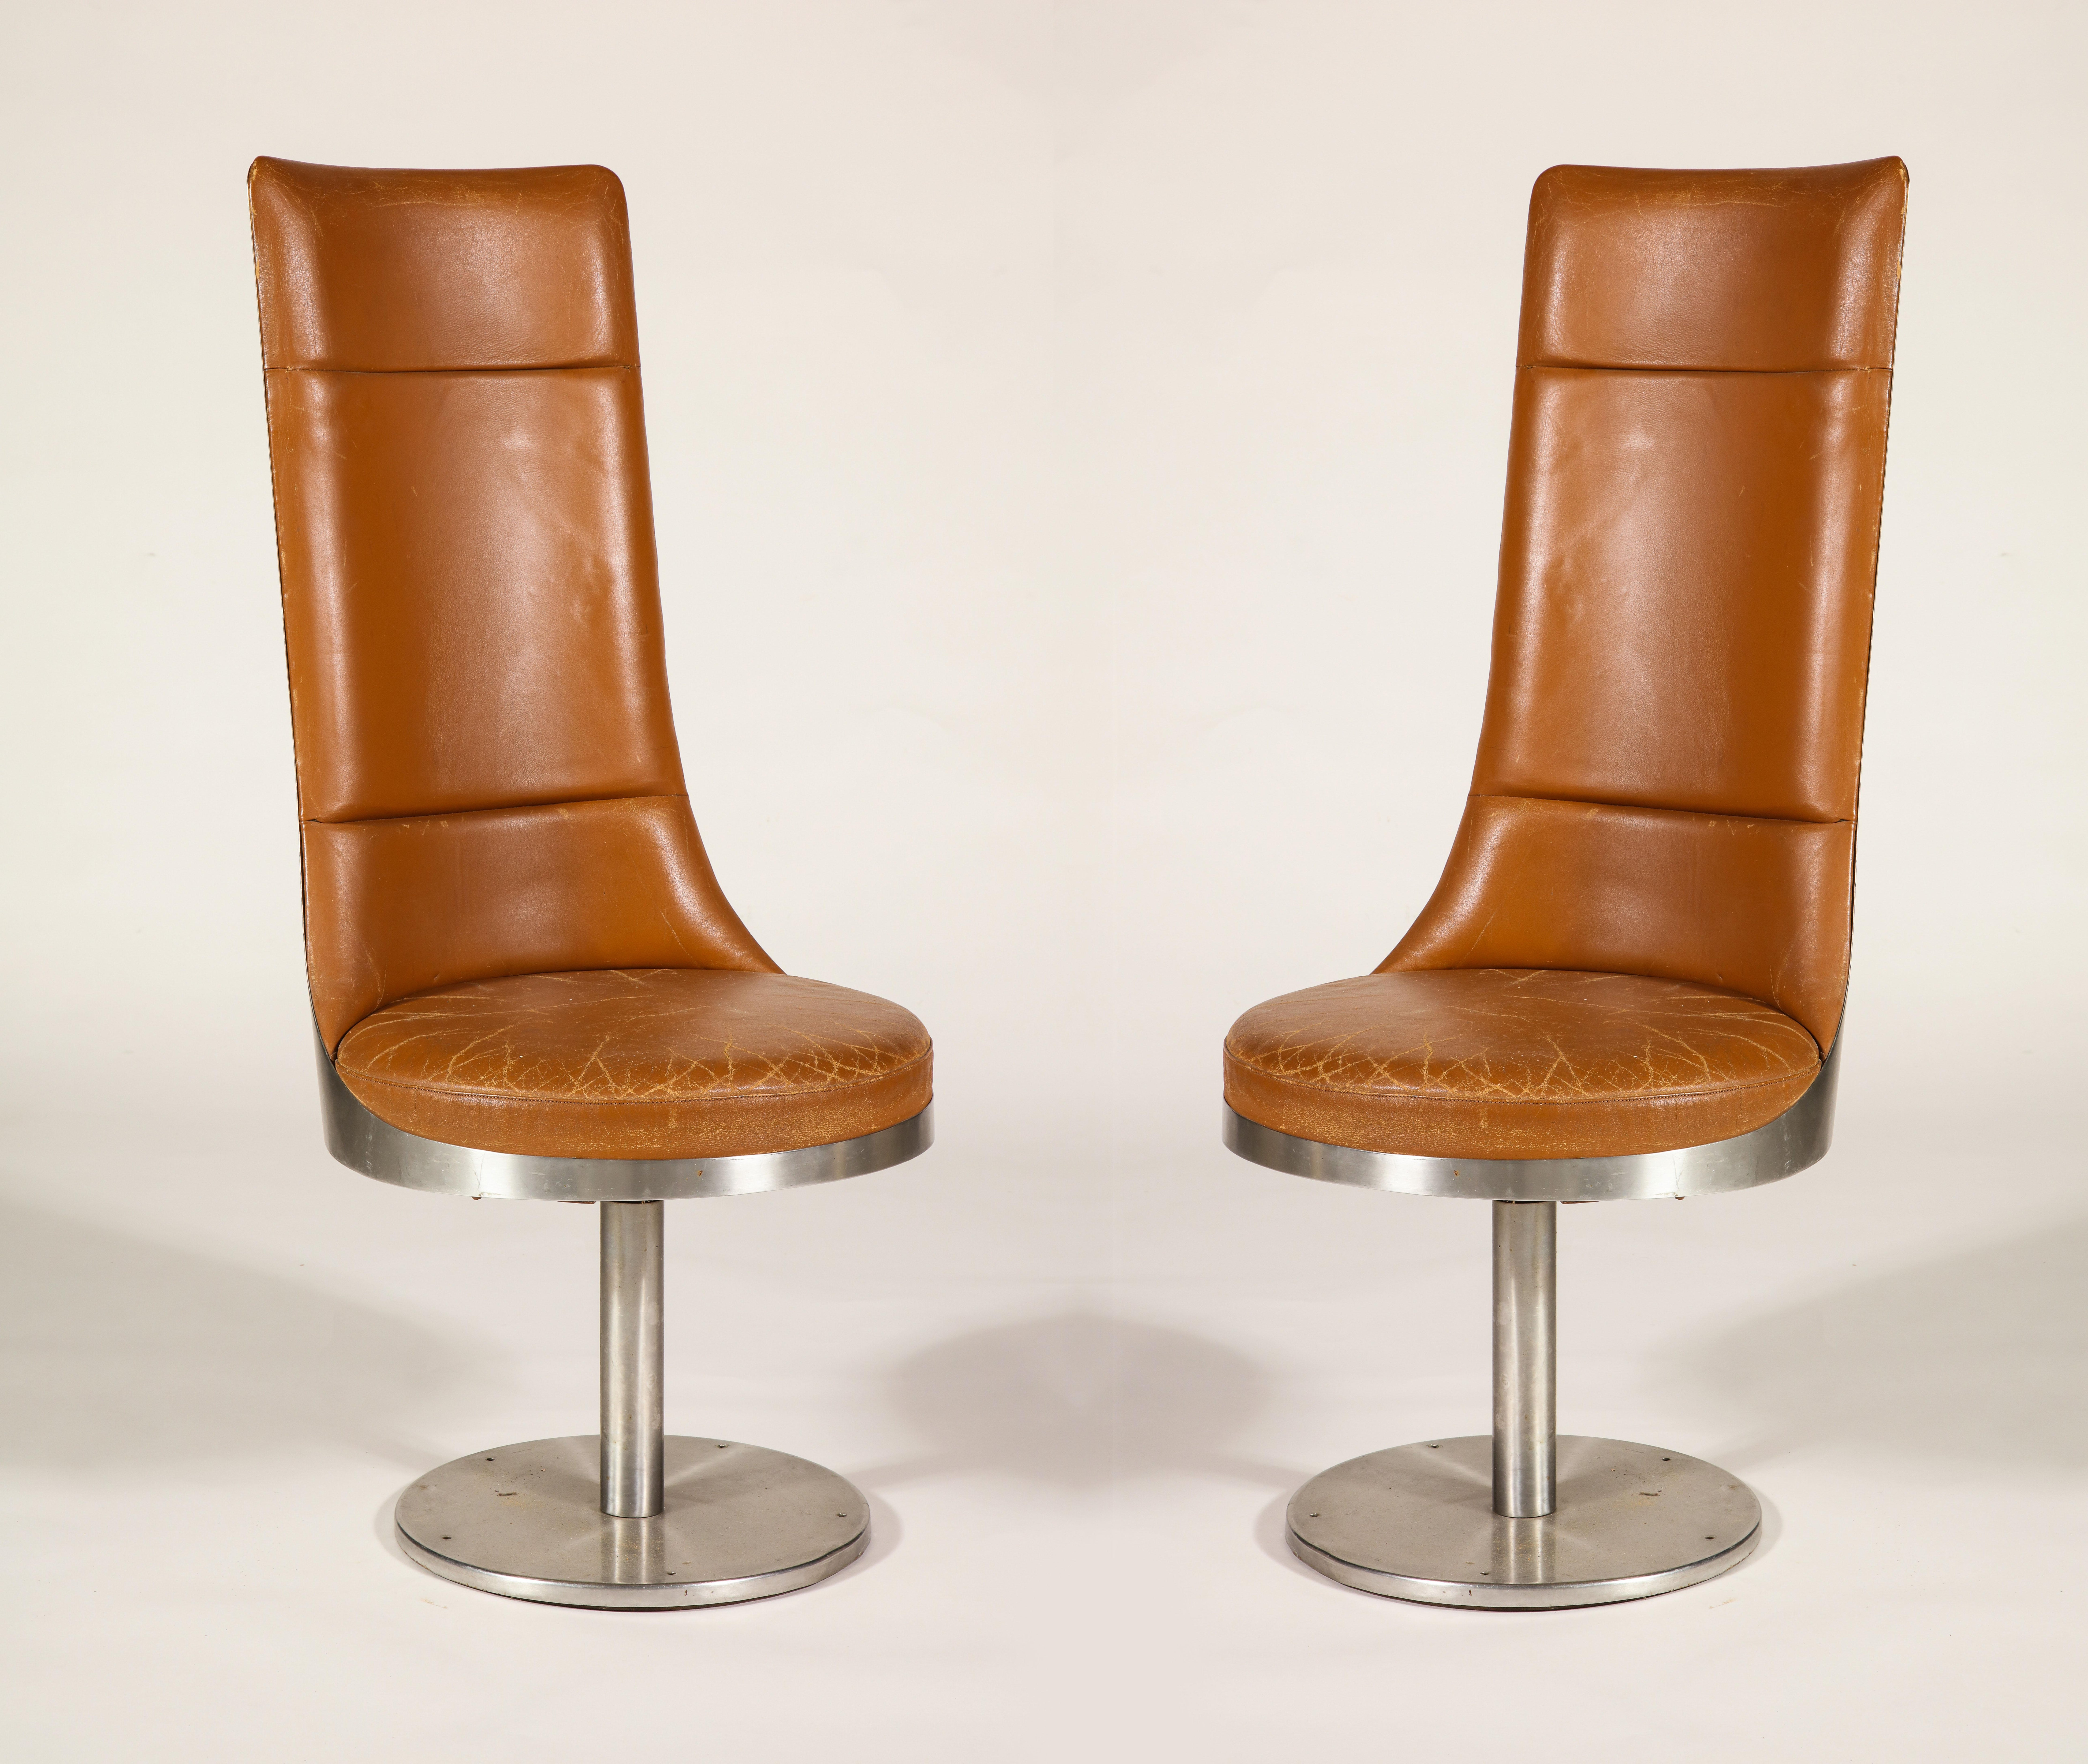 Maria Pergay Architonic pair of steel brown leather chairs, France, 1970s

Incredible and rare pair of chairs by Maria Pergay for Architonic. These chairs swivel and are an incredible addition to any decor.

Maria Pergay’s career began while